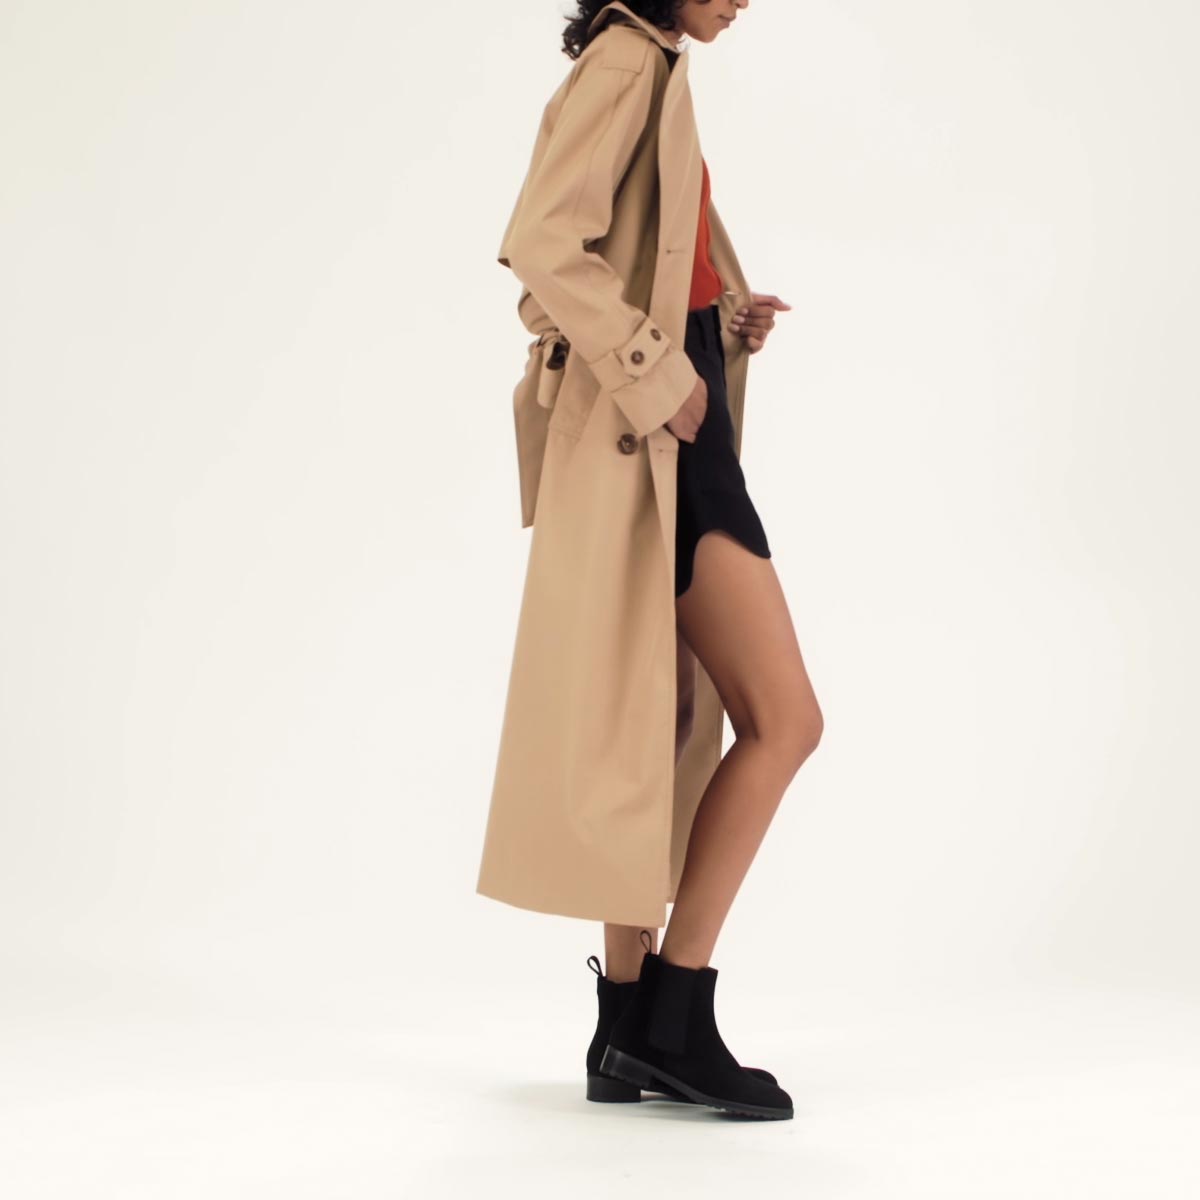 The Chelsea Boot in Black Suede shown on model styled with a tan calf-length trench coat, black mini skirt and red top.